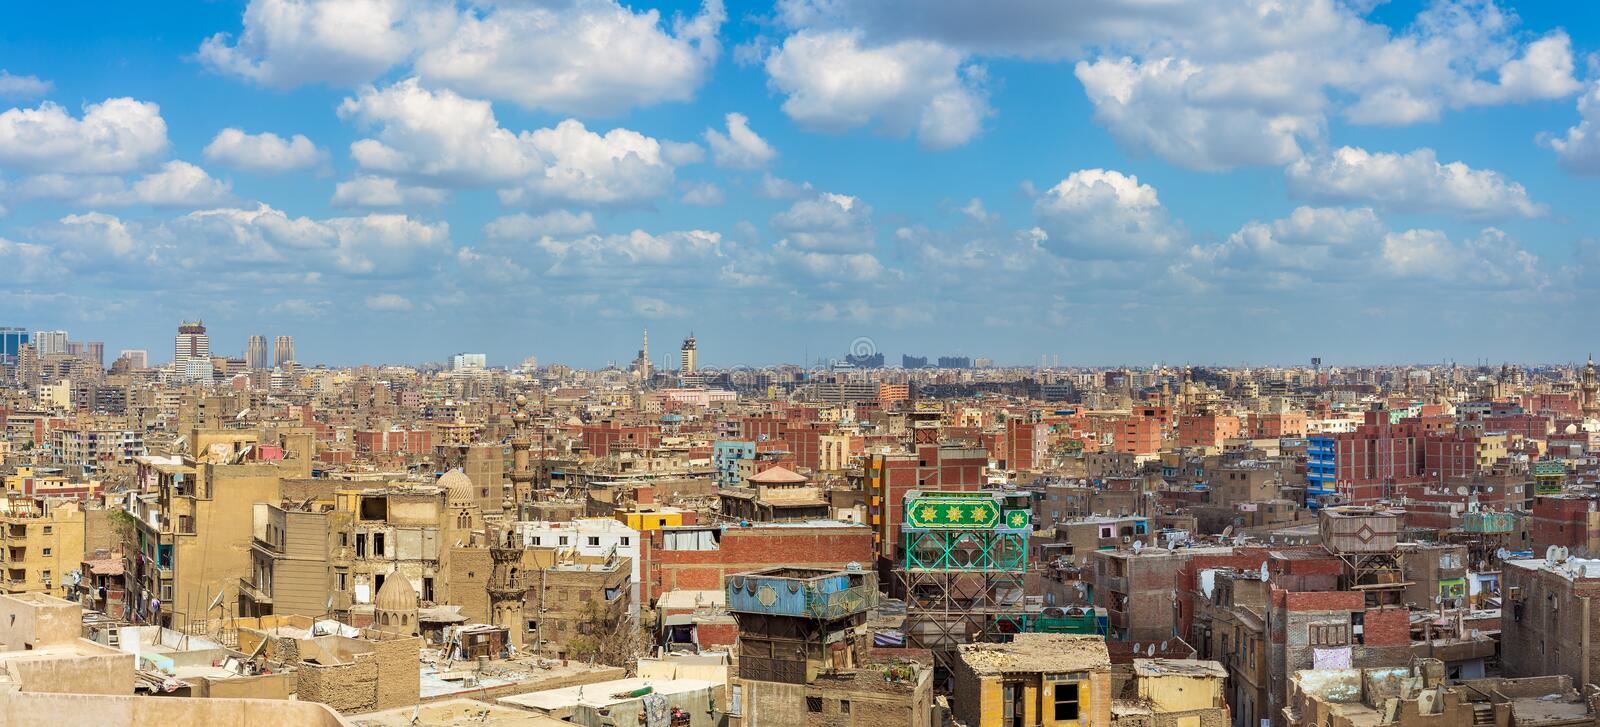 Old Cairo Area